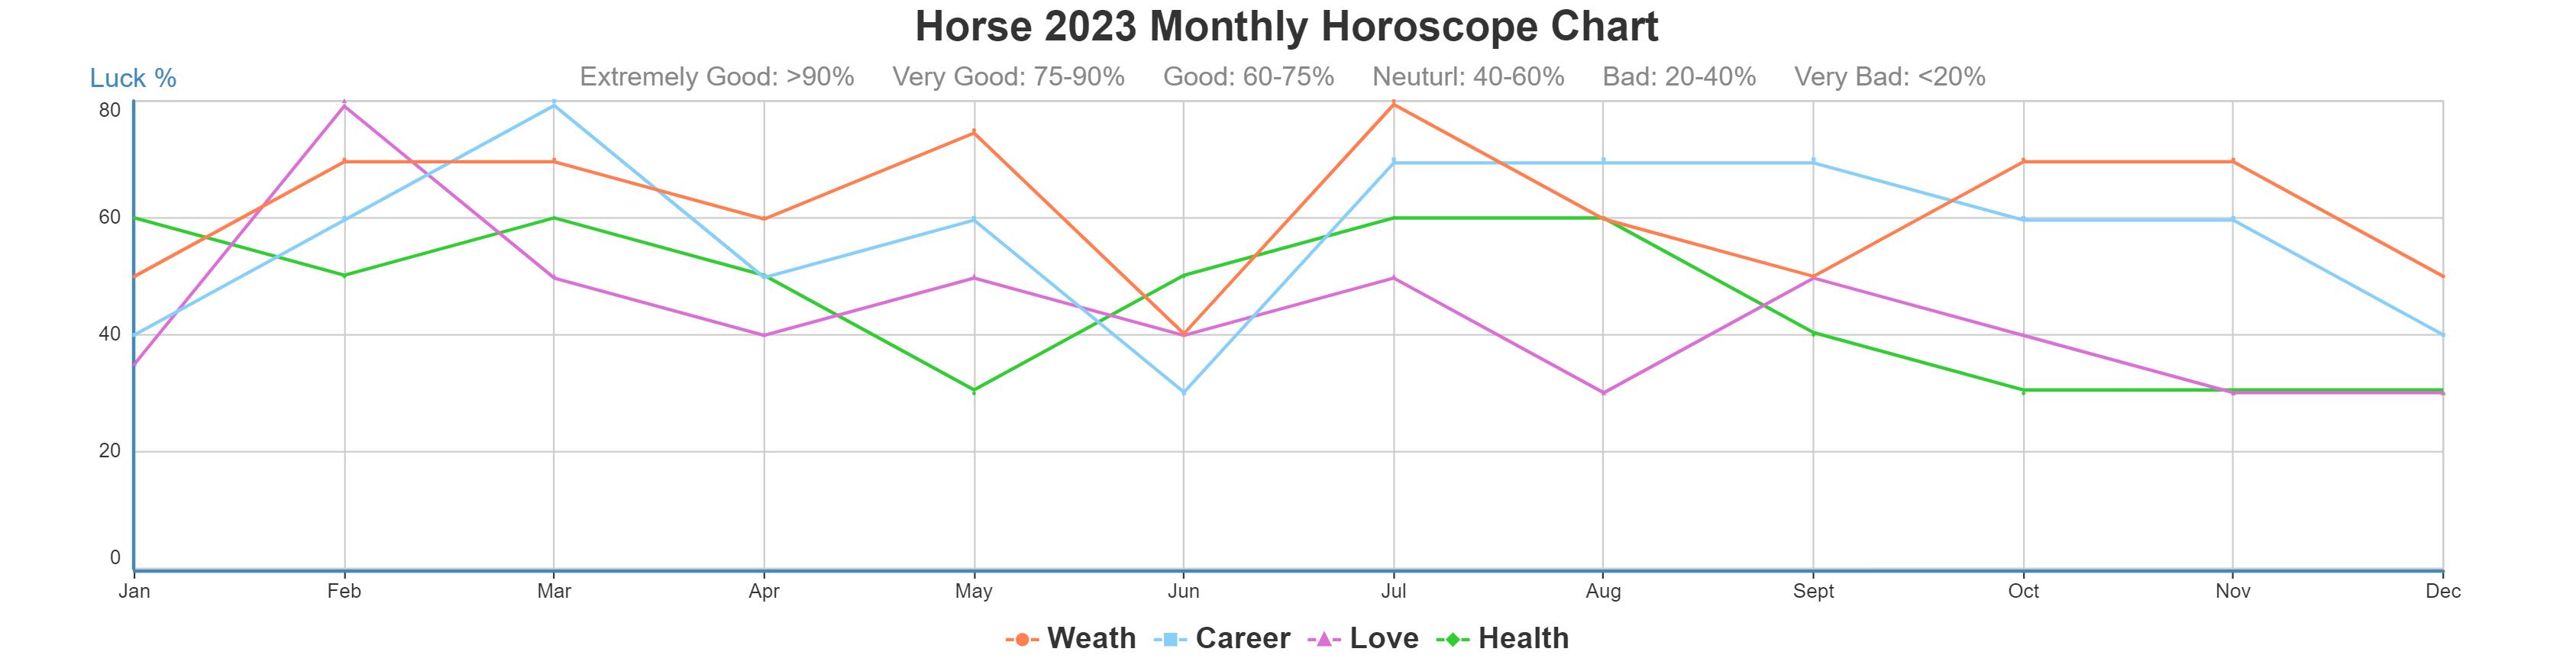 Chinese Horoscope for Horse, 2023/2024 Horse Yearly and Monthly Predictions